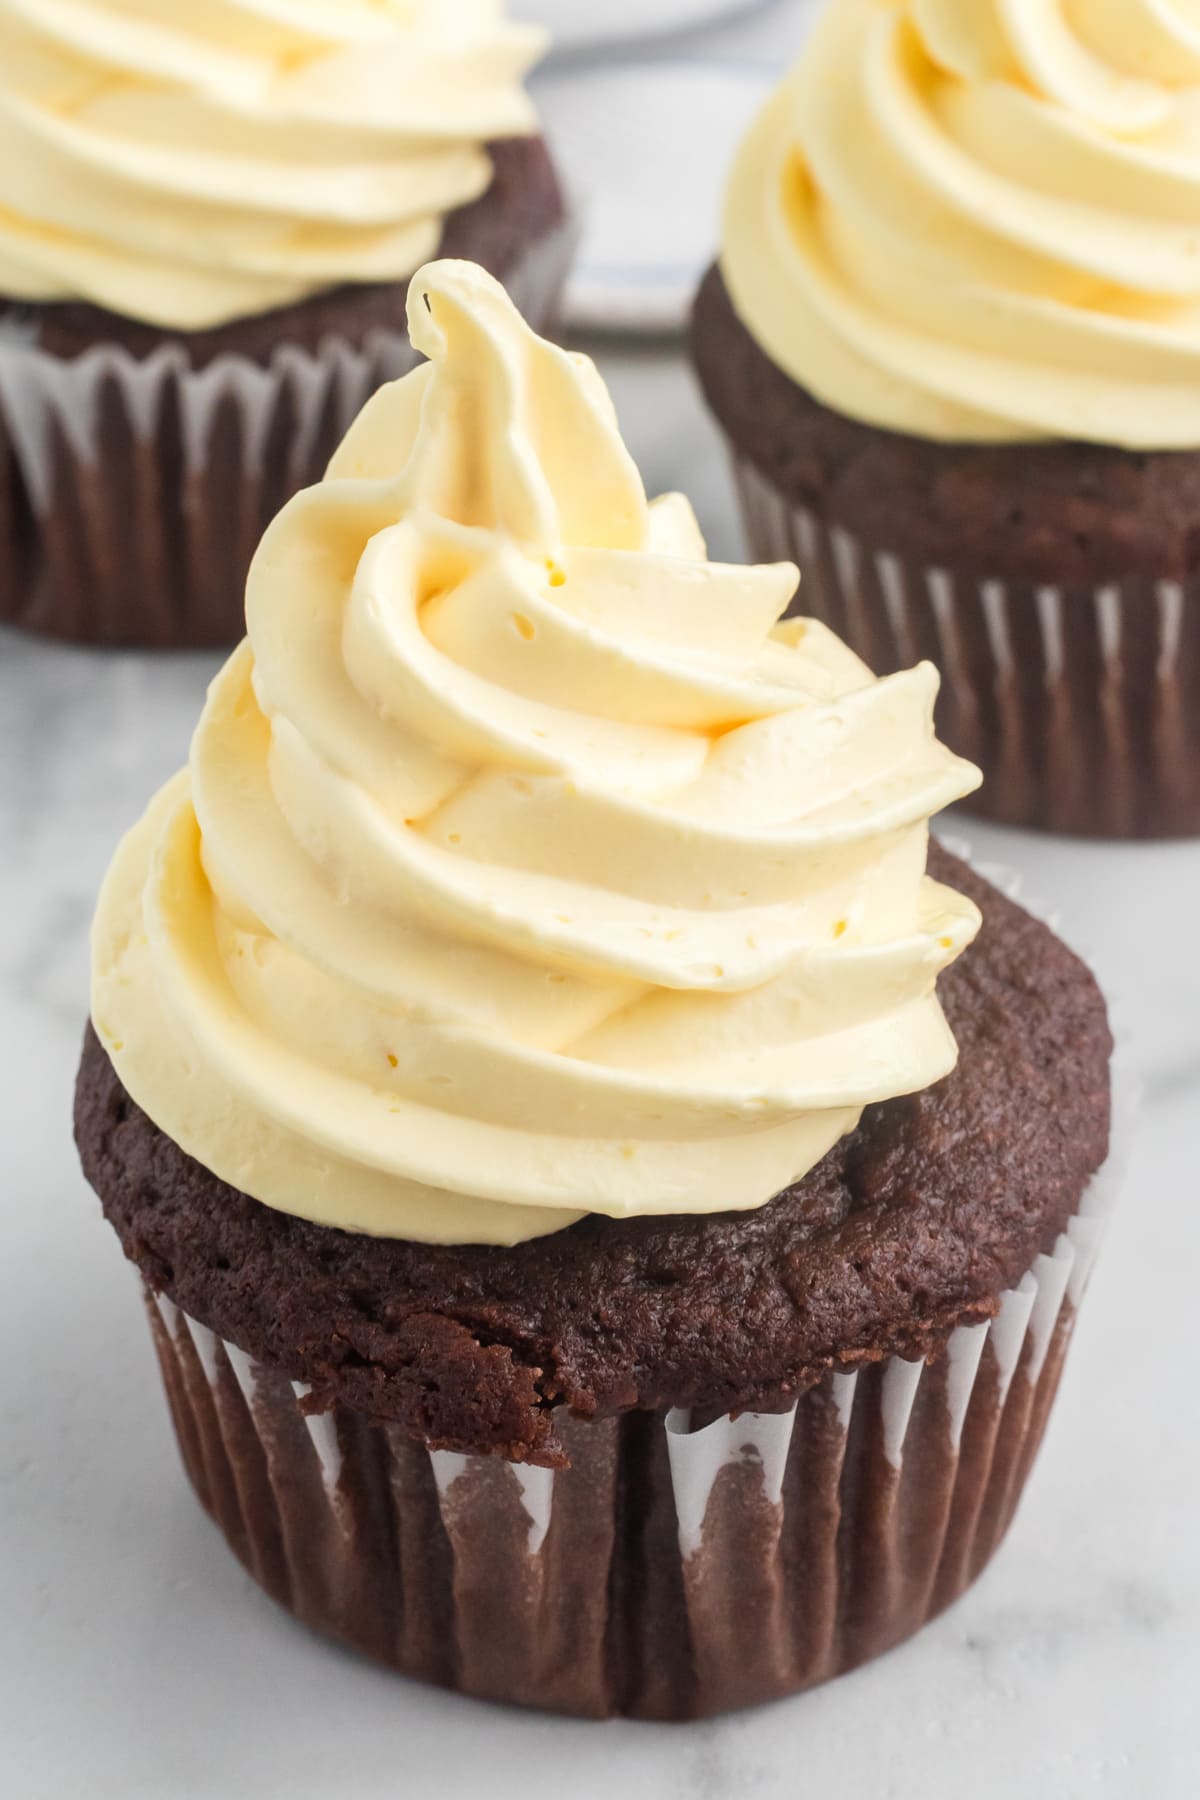 Close up of a chocolate cupcake with cool whip frosting.